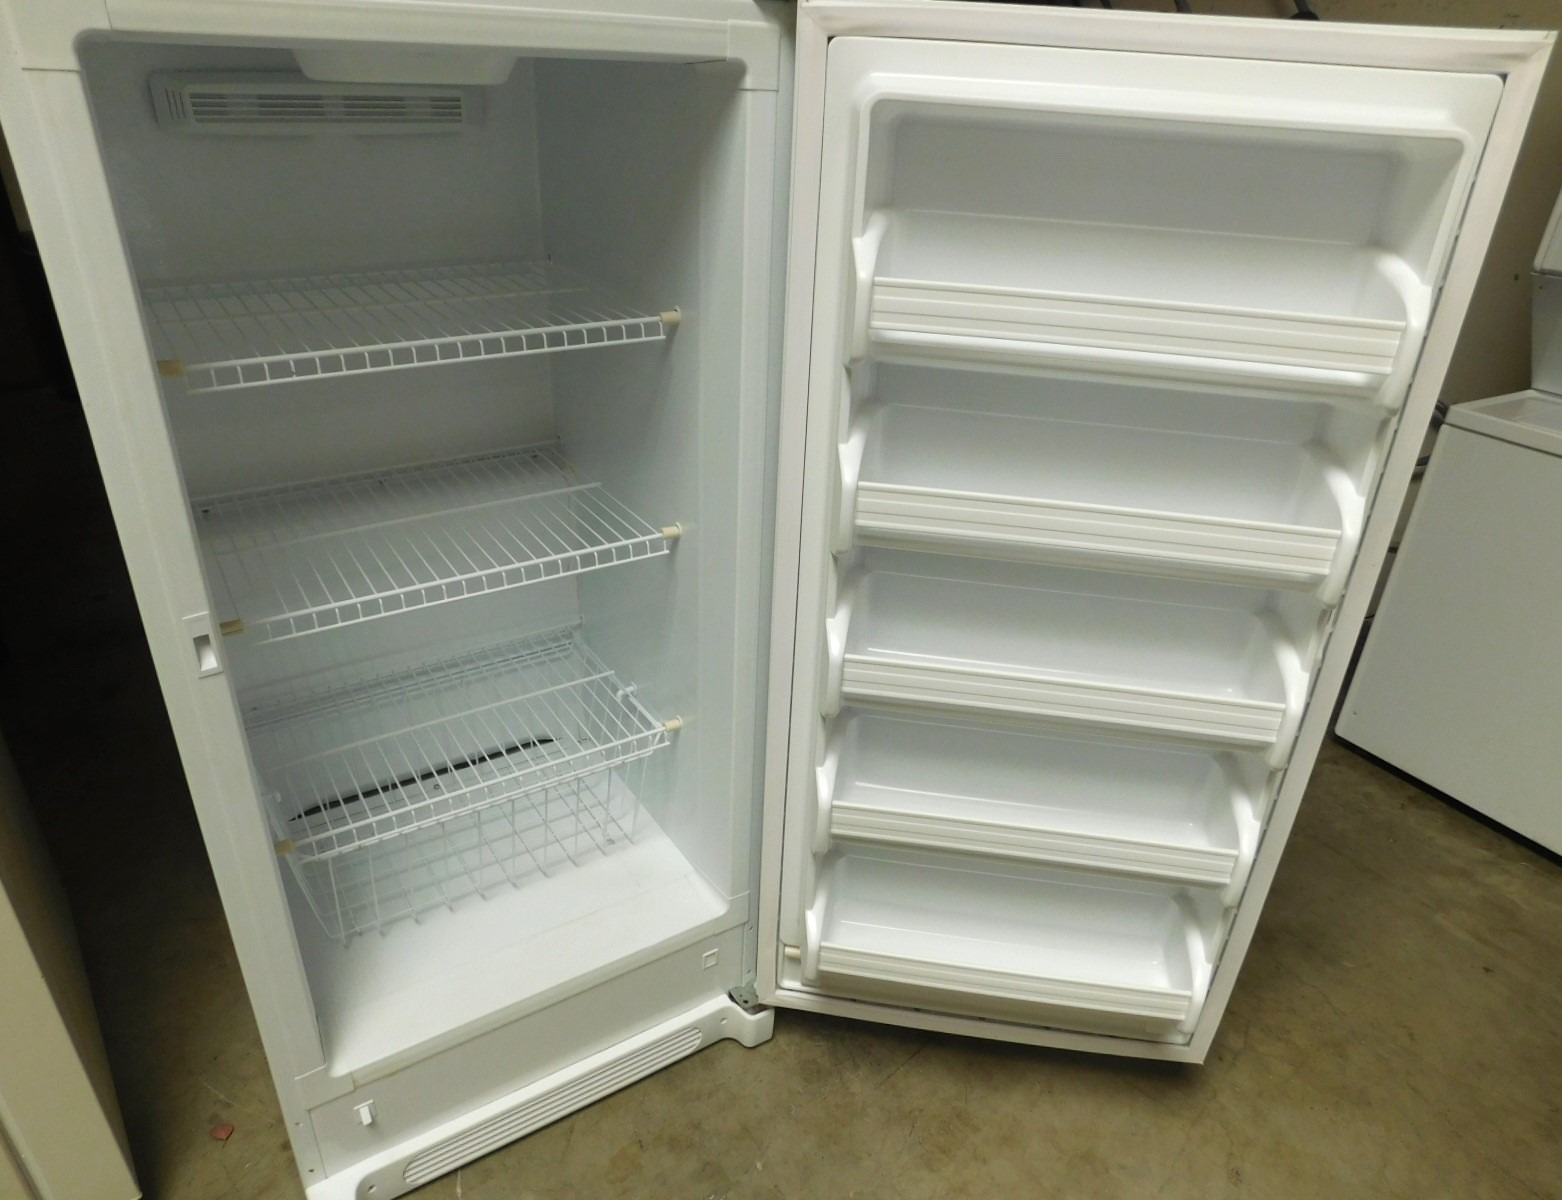 kenmore 5 0 cu ft upright freezer 2850 from